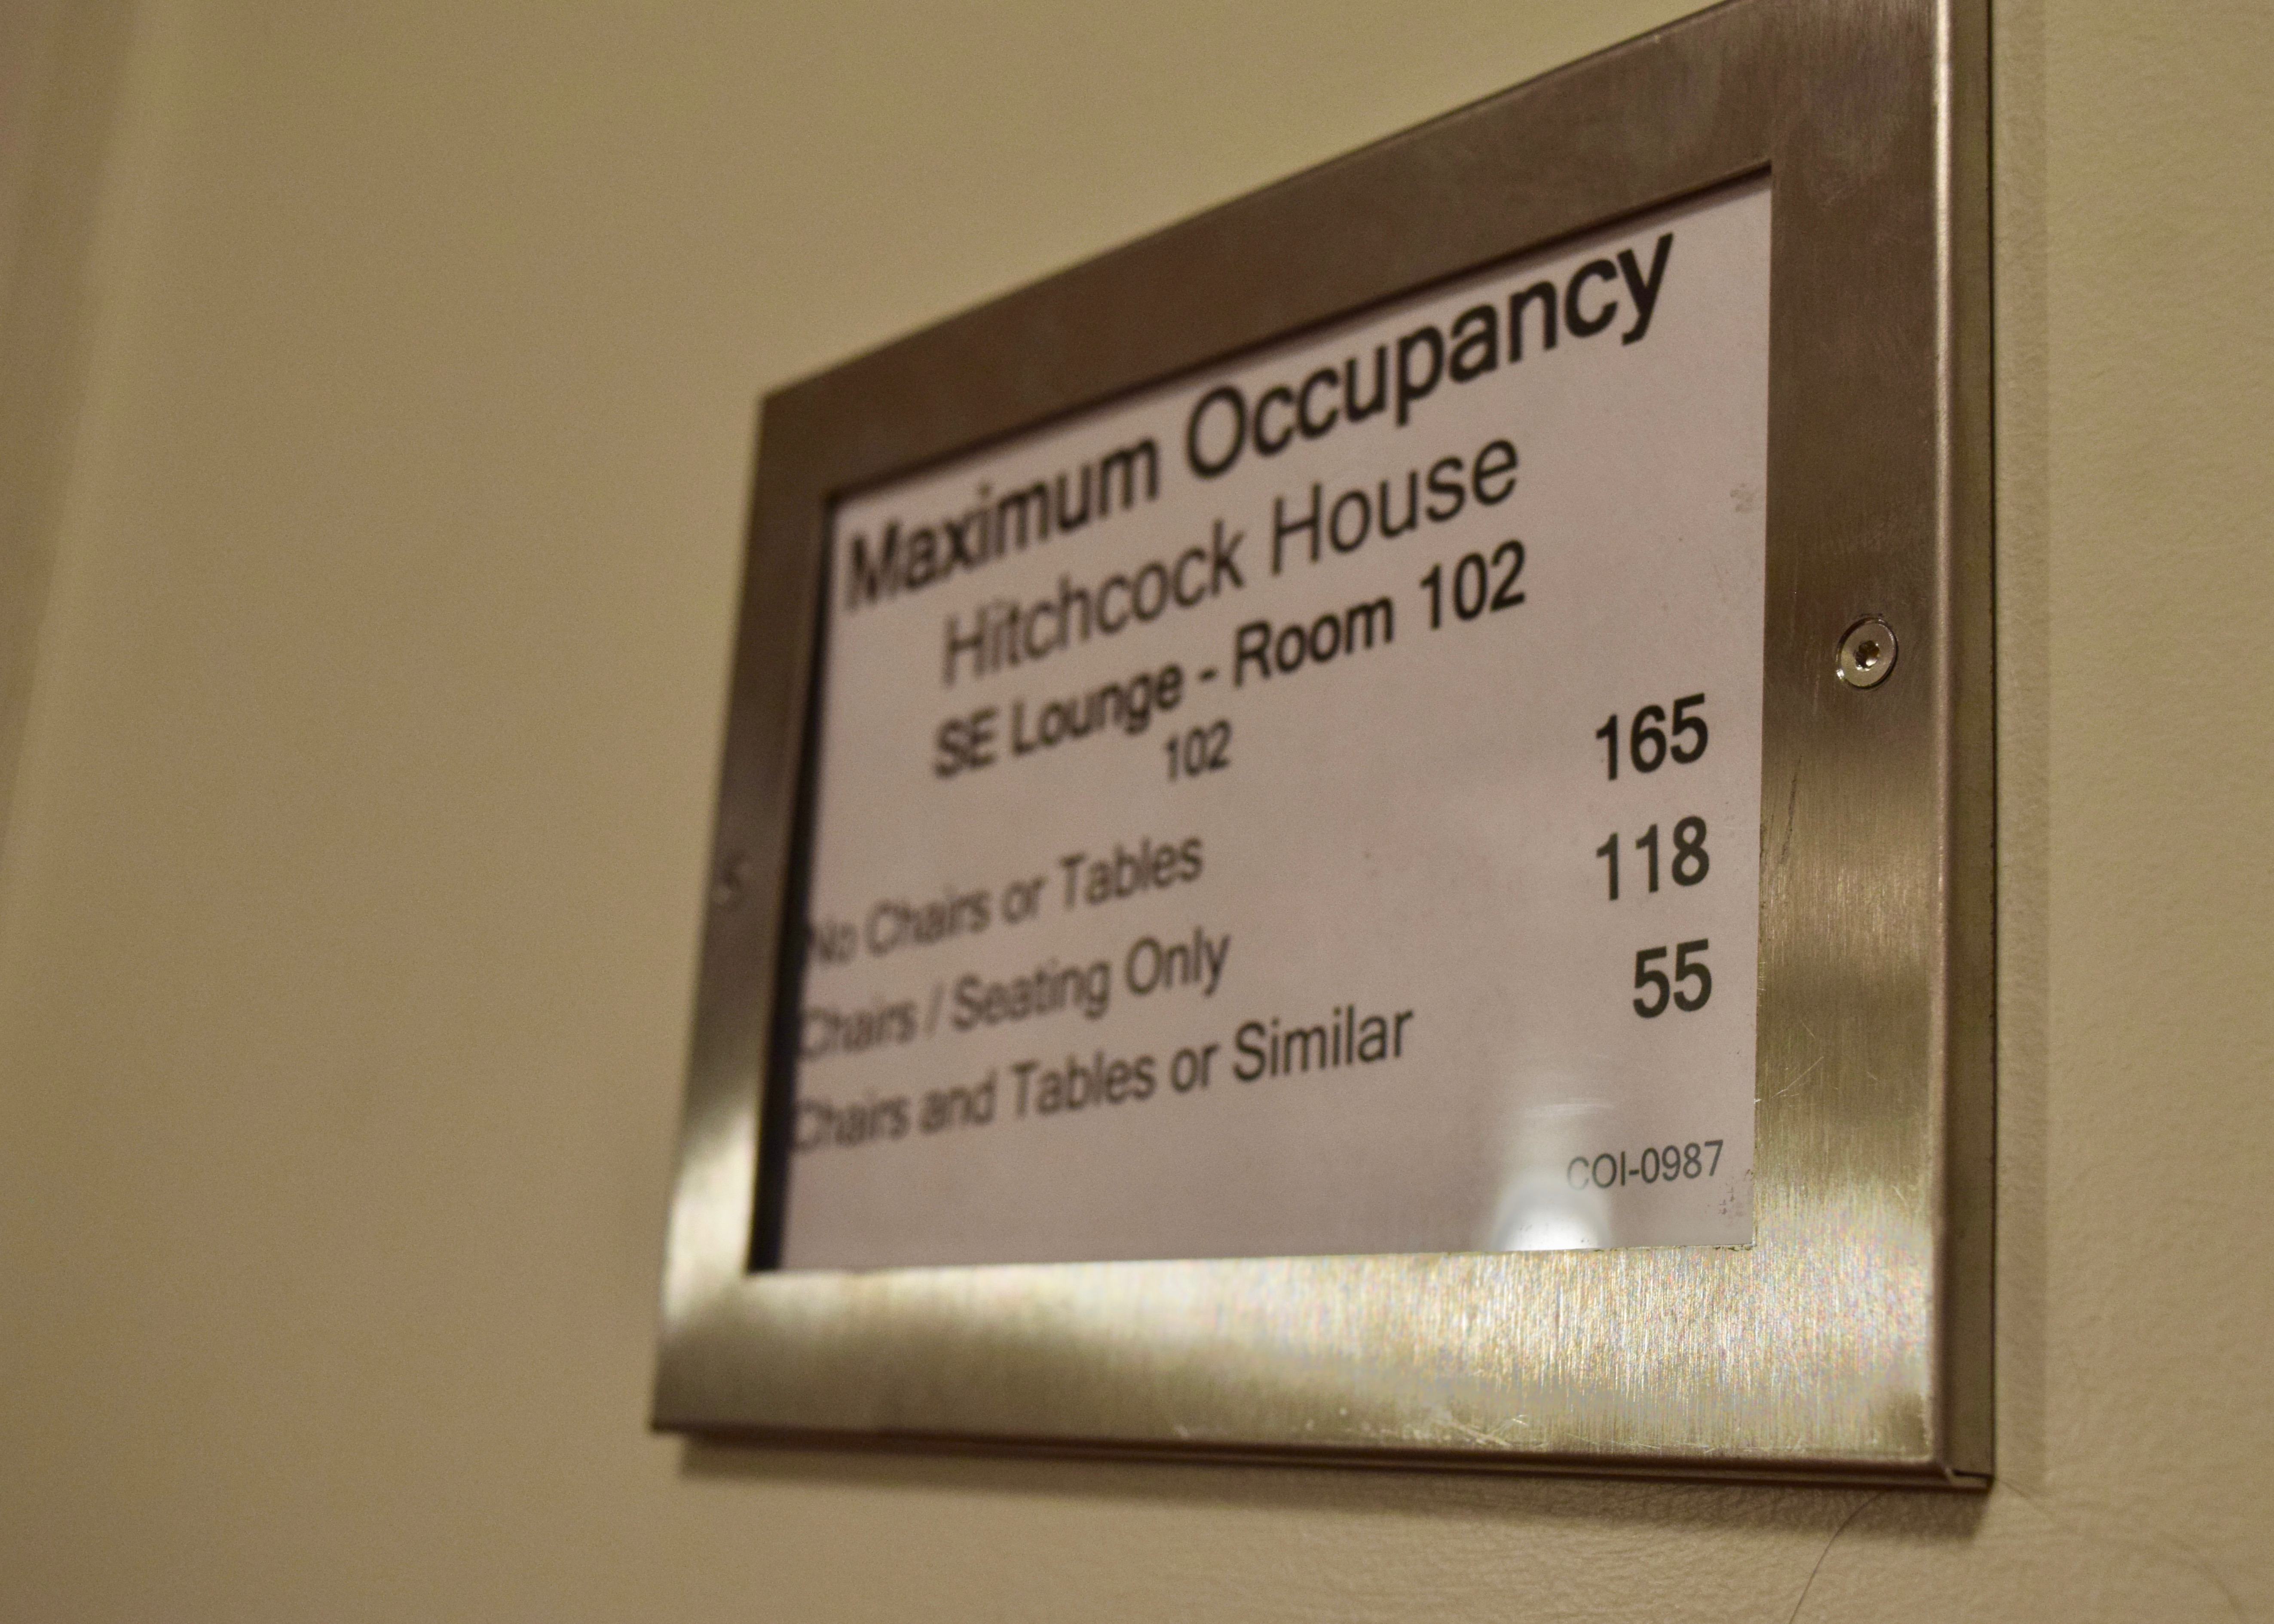 A frame on the wall posts the maximum occupancy in the SE Lounge, or Room 102, for Hitchcock House: "No Chairs or Tables — 165," "Chairs/Seating Only — 118" and "Chairs and Table or Similar — 55."